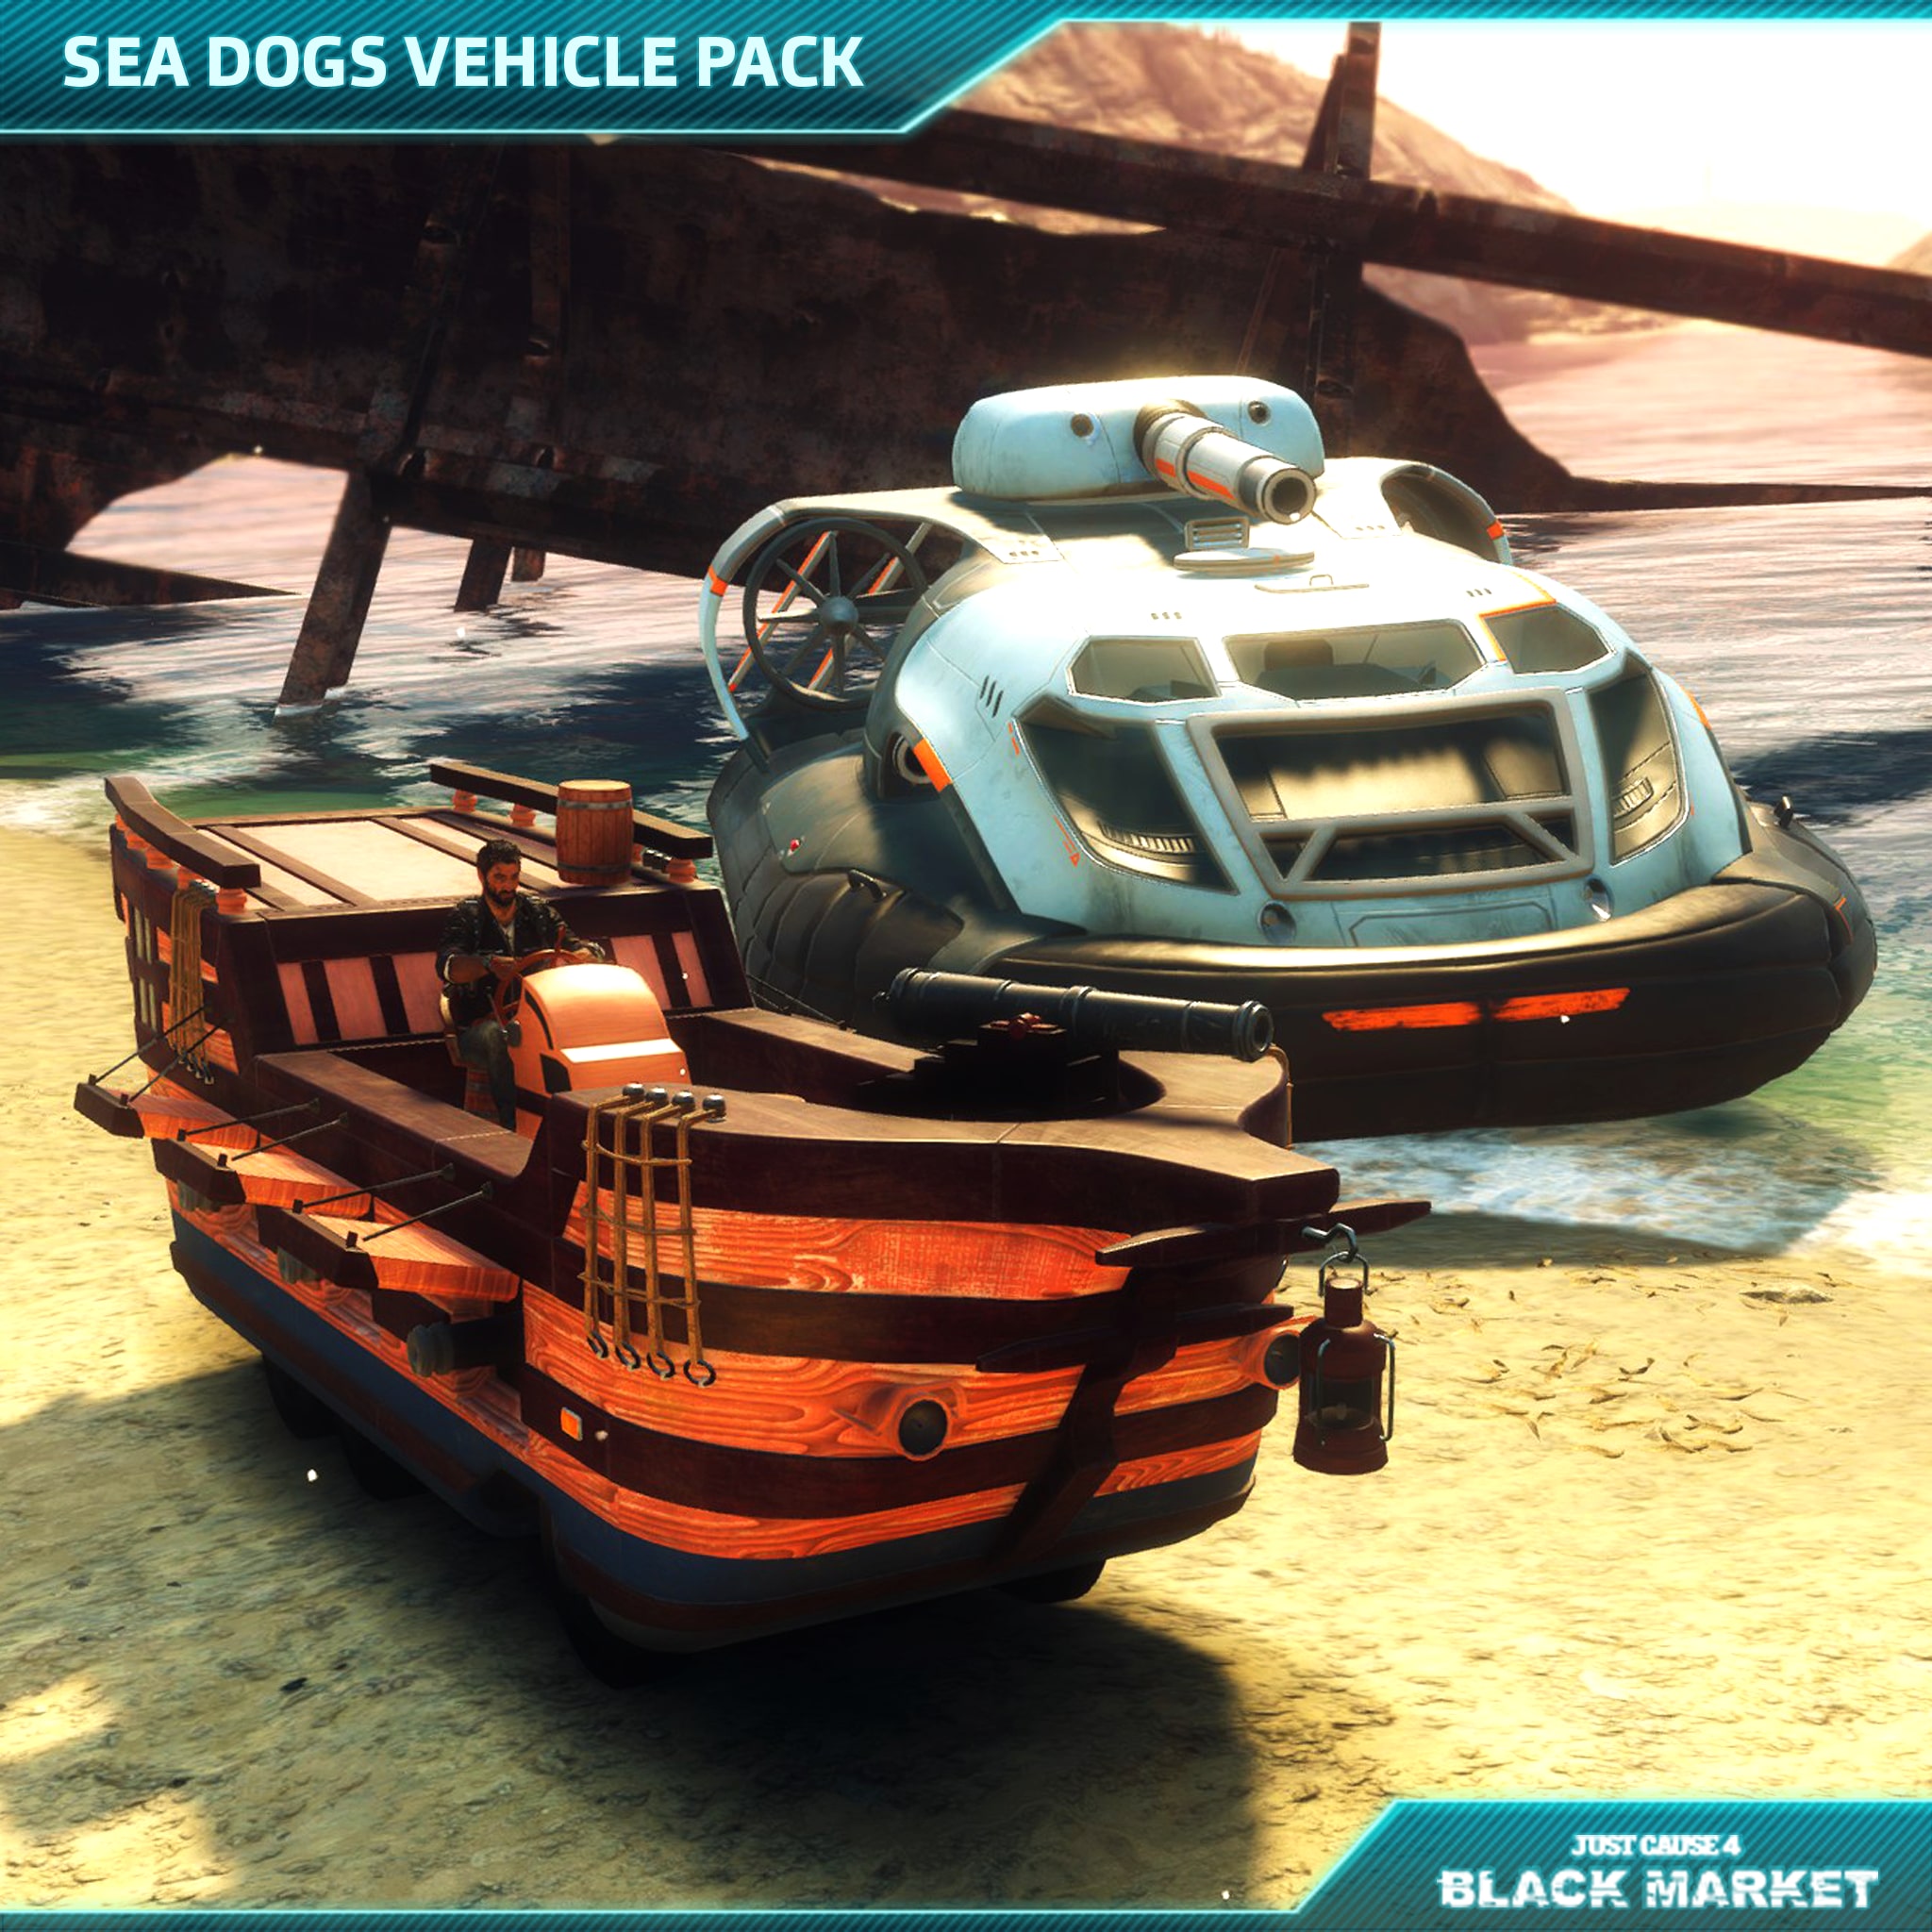 Just Cause 4 - Sea Dogs Vehicle Pack